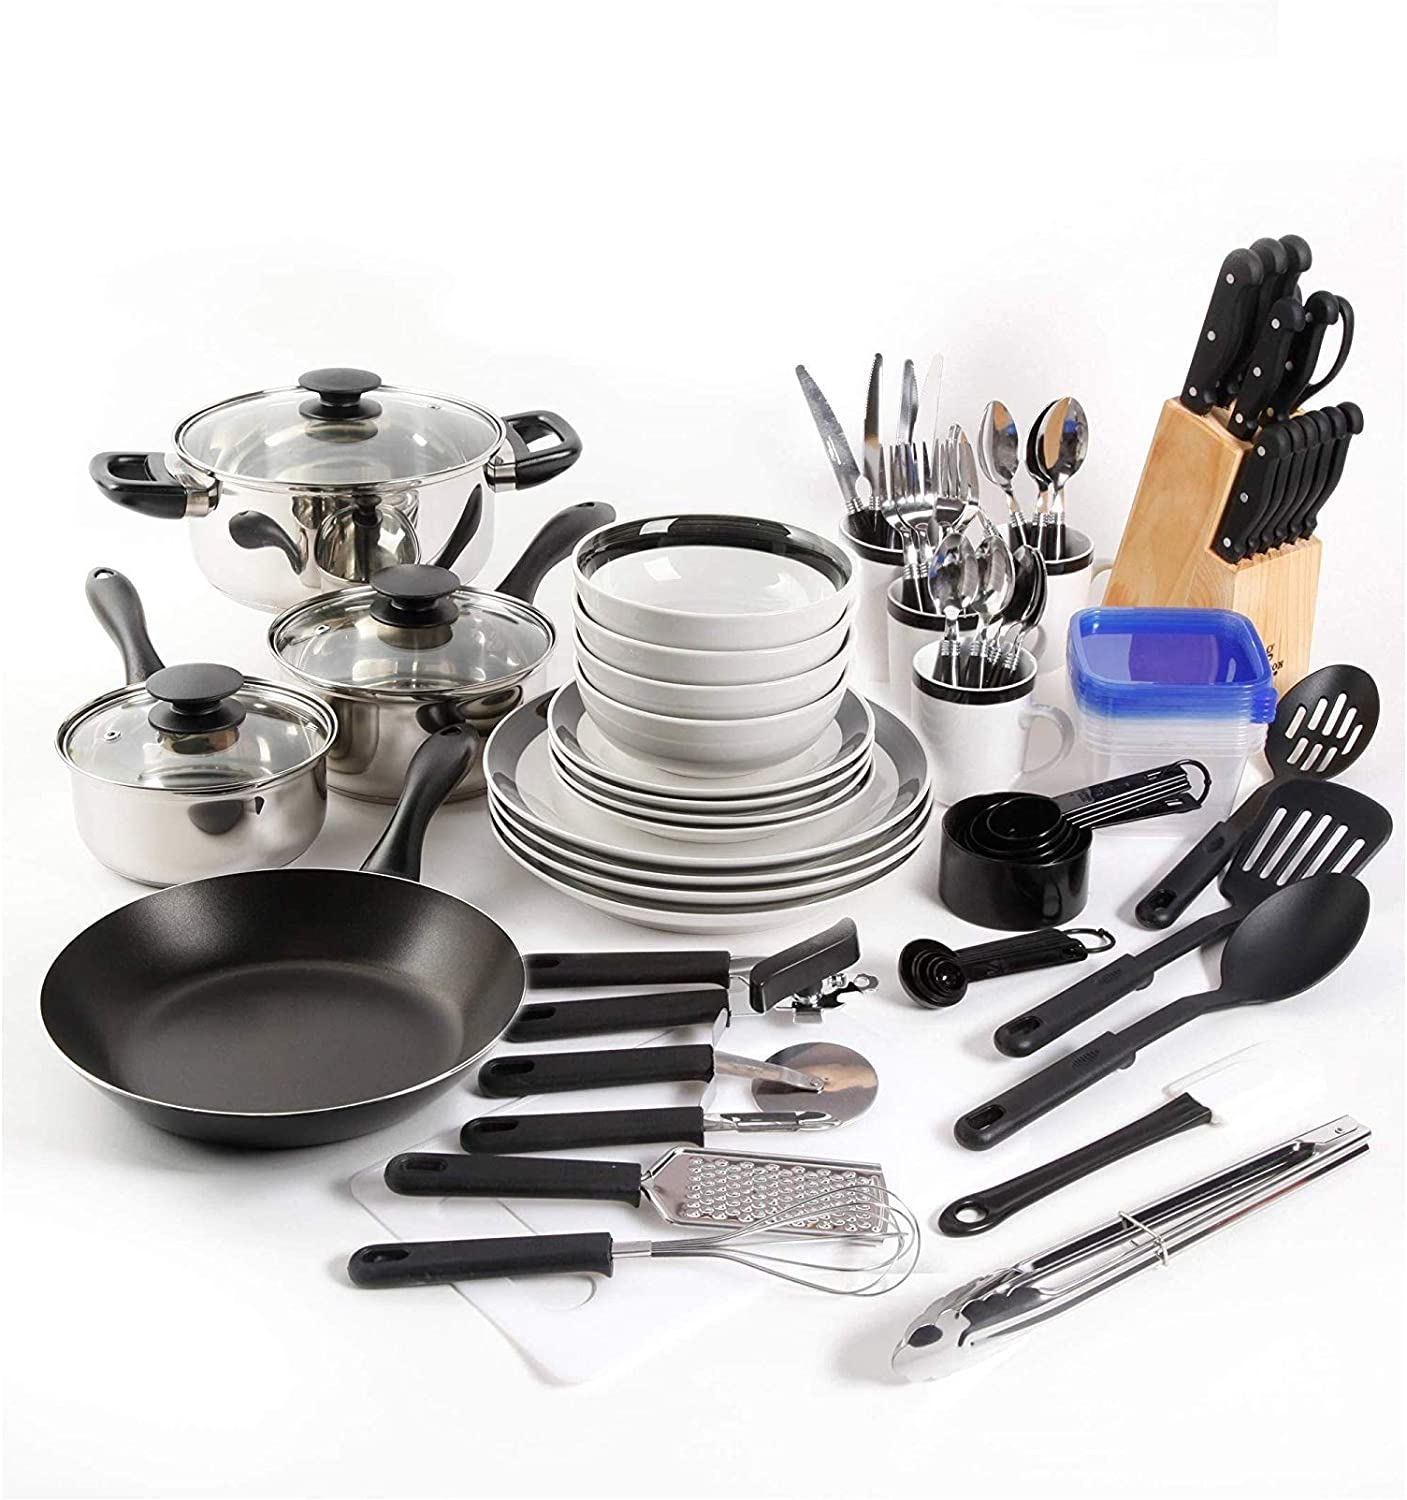 Large Kitchen Combo Set. This 83 piece kitshen starter set has everything you need. Stainless steel cookware, dinnerware, flatware, storage containers and gadgets for stirring, flipping and chopping.